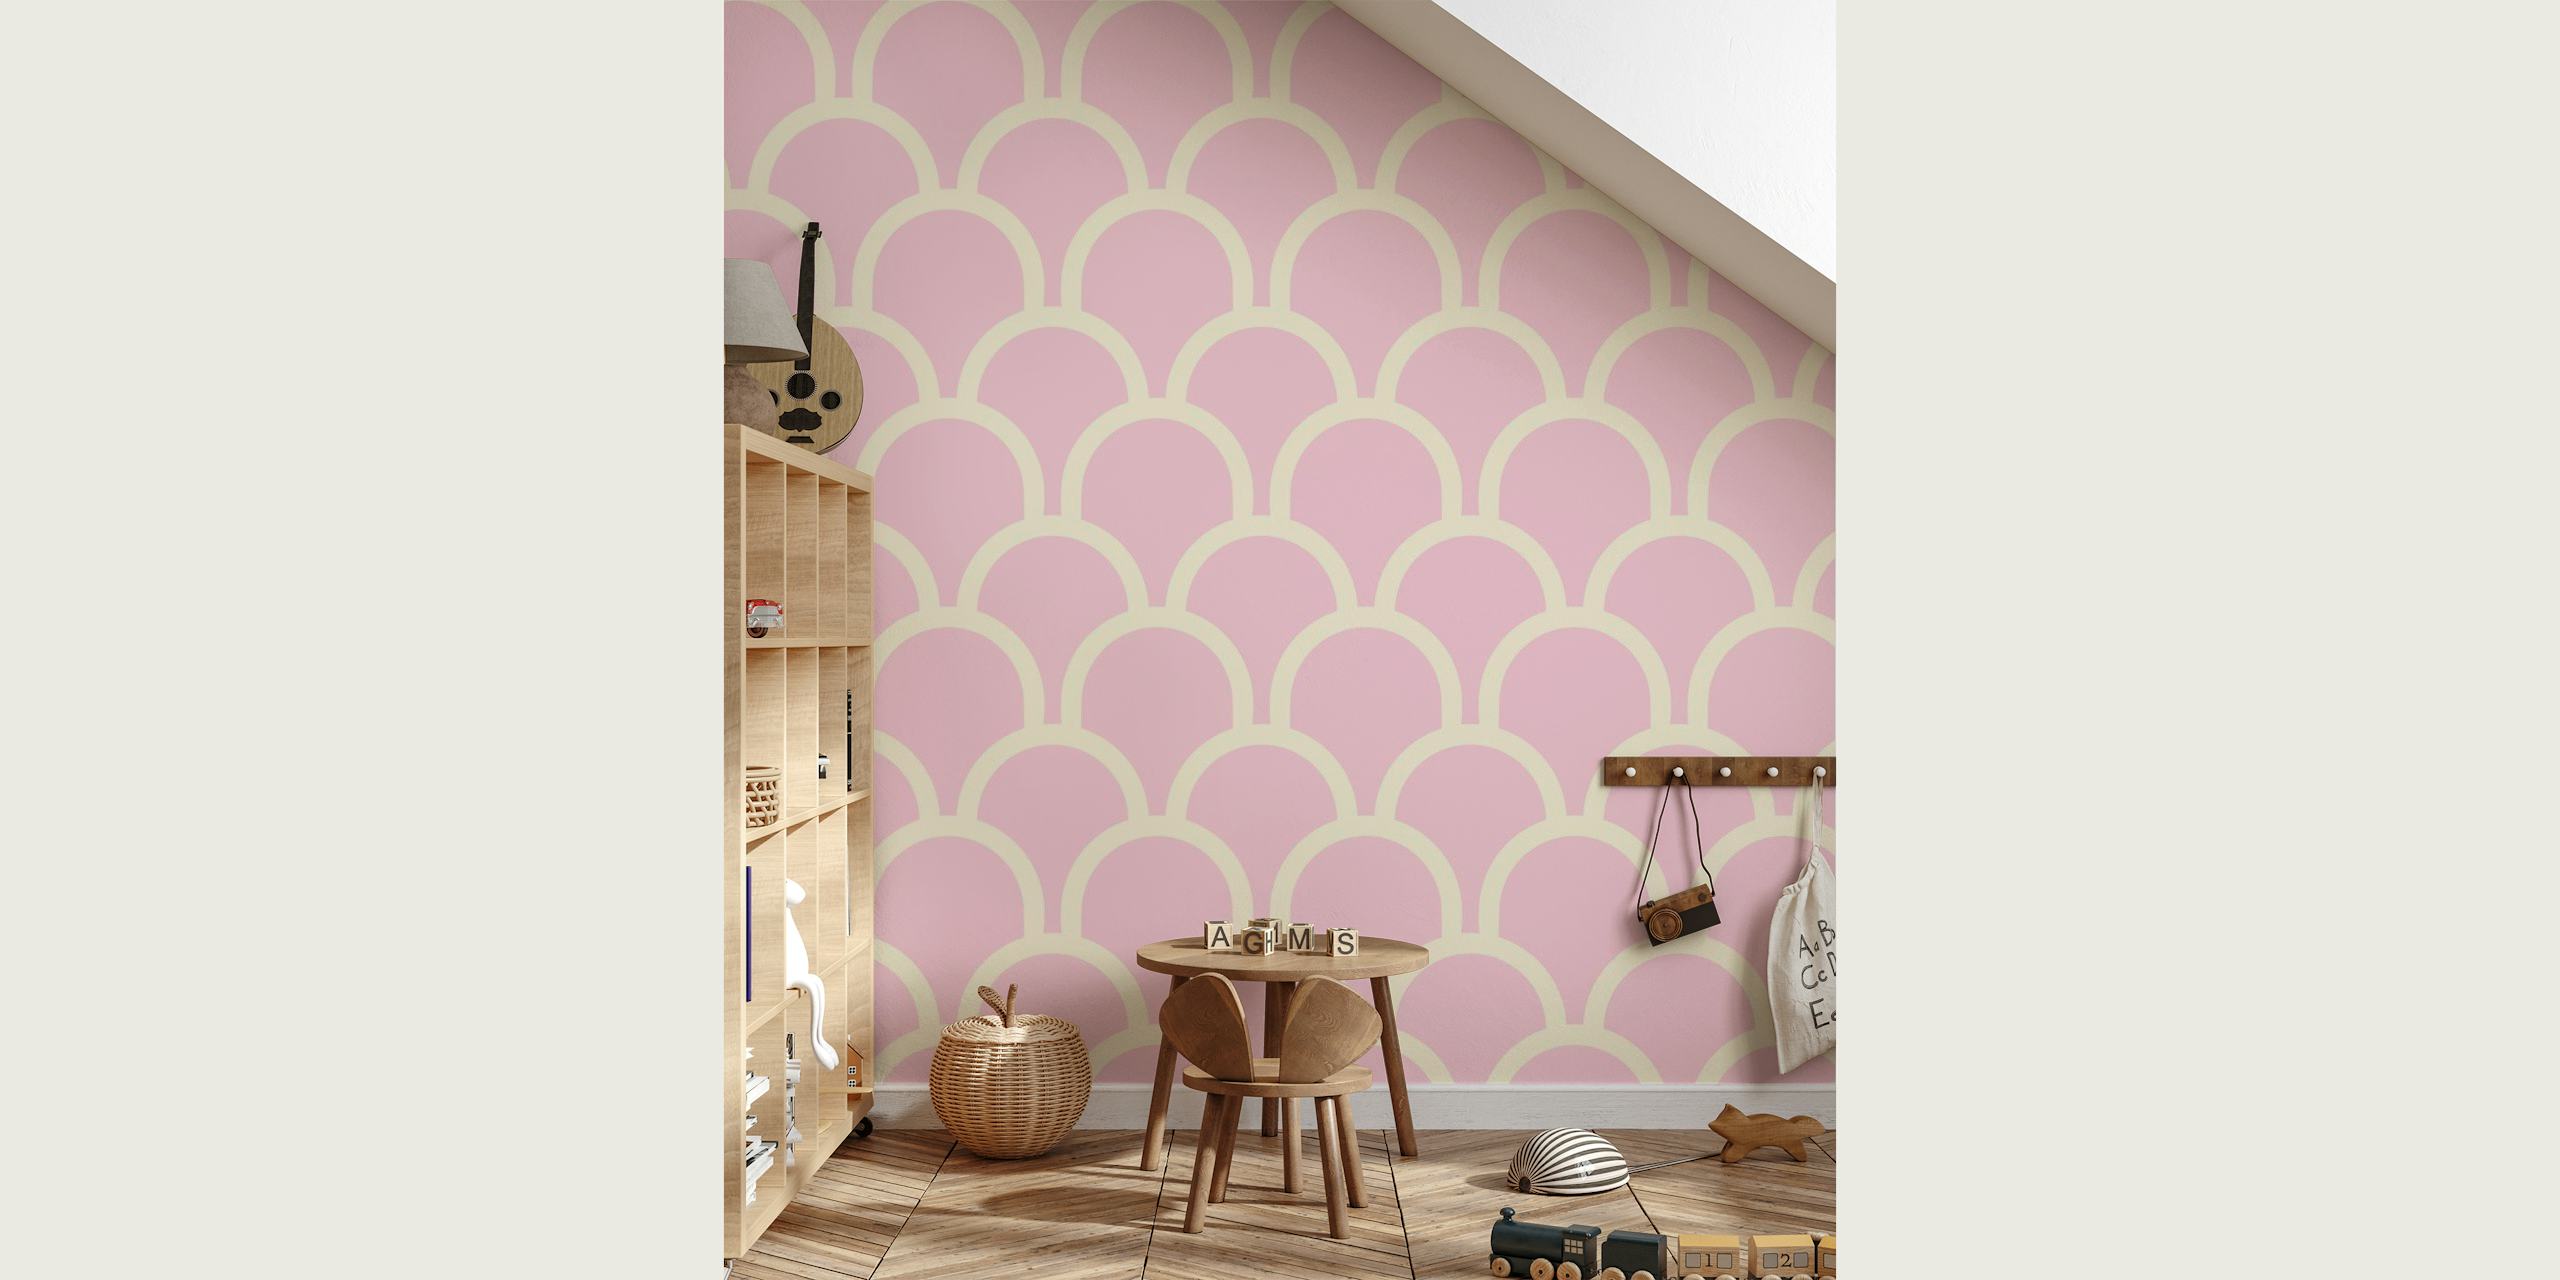 Scallop Pink wall mural with elegant scallop shapes in a soft pink color